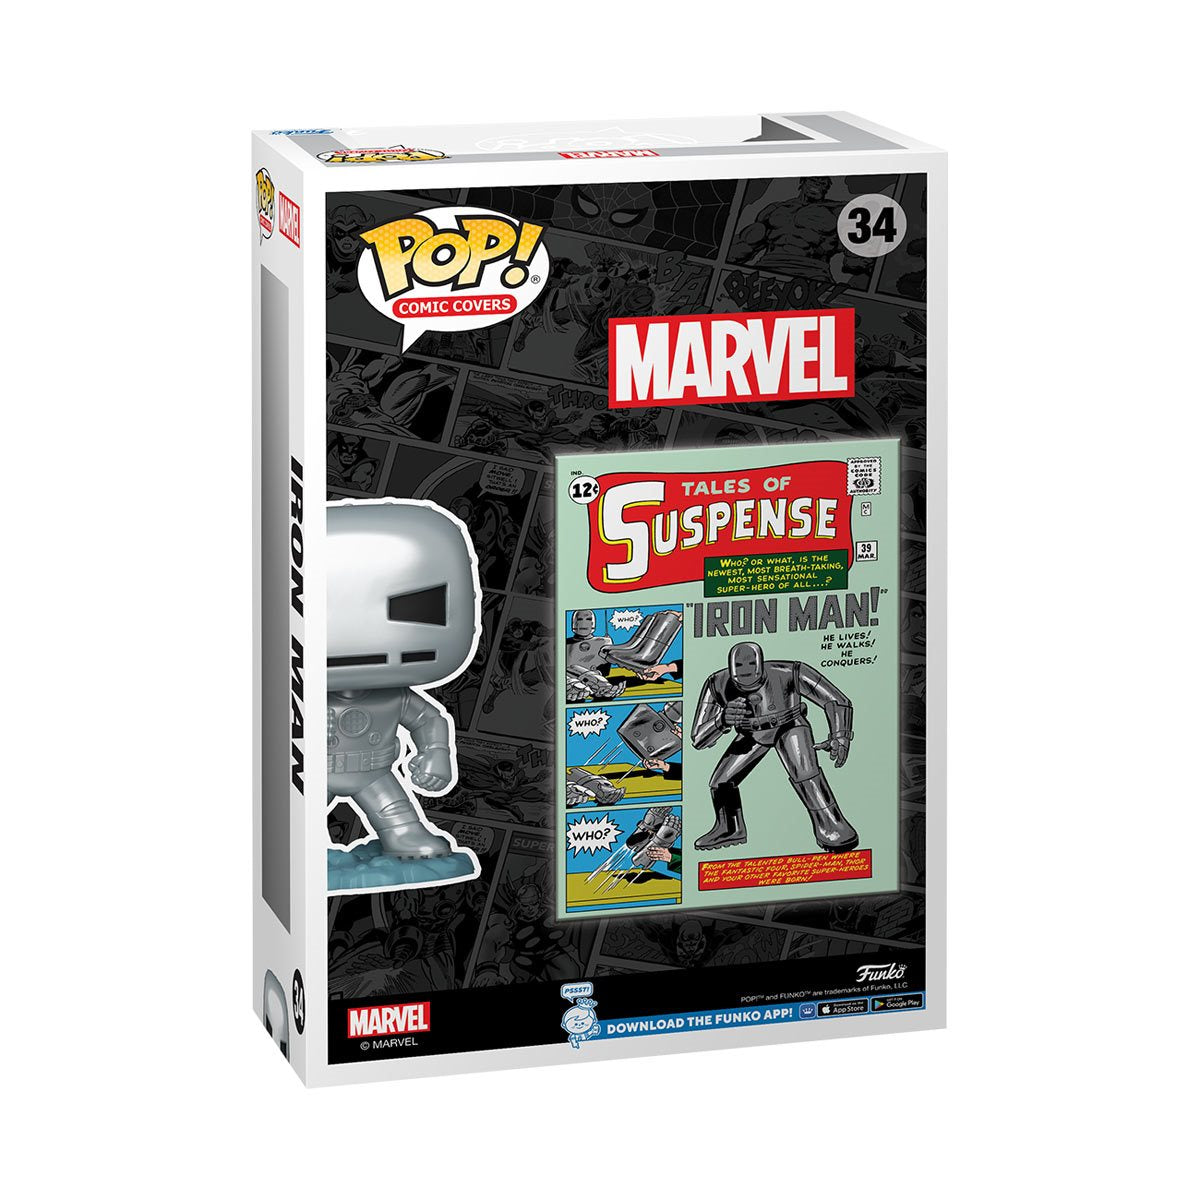 Funko Marvel Tales of Suspense #39 Pop! Comic Cover Figure #34 with Case - *PREORDER*